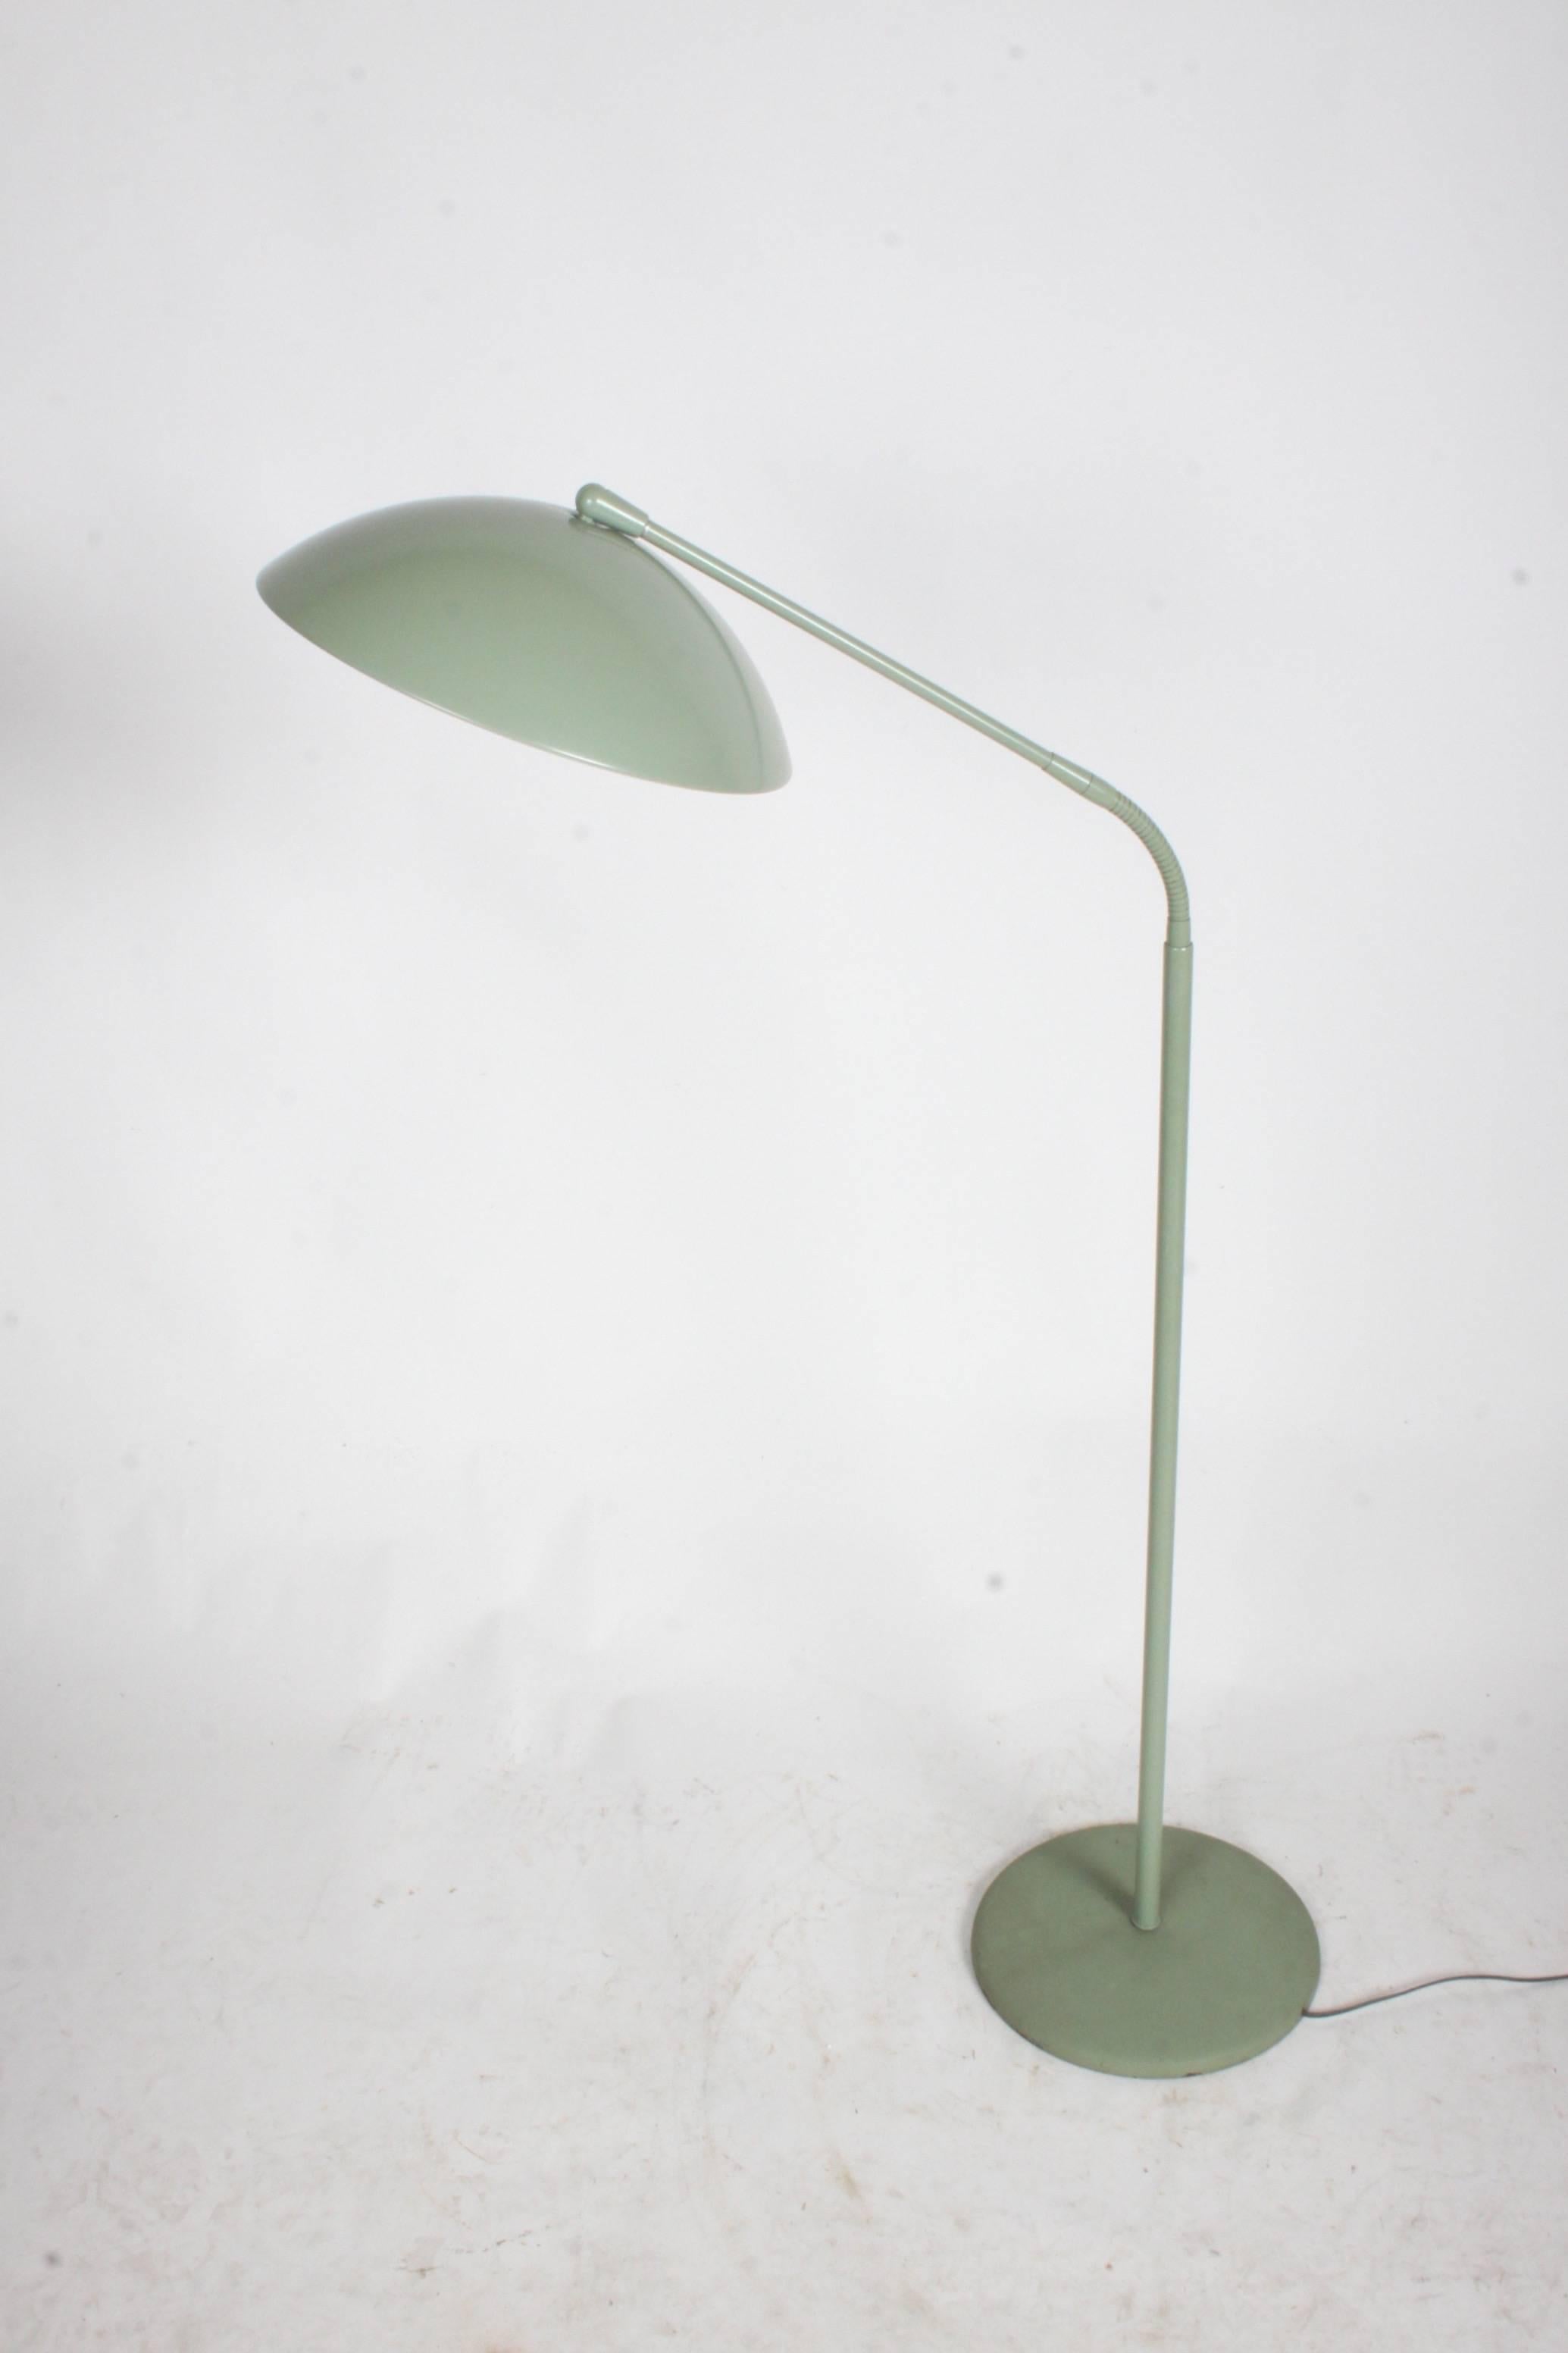 Vintage Mid Century Modern green Kurt Versen  gooseneck adjustable floor lamp , retains original paint. Overall nice condition, some wear to base top, shade very nice. Two sockets, works great. Shade is 14.25